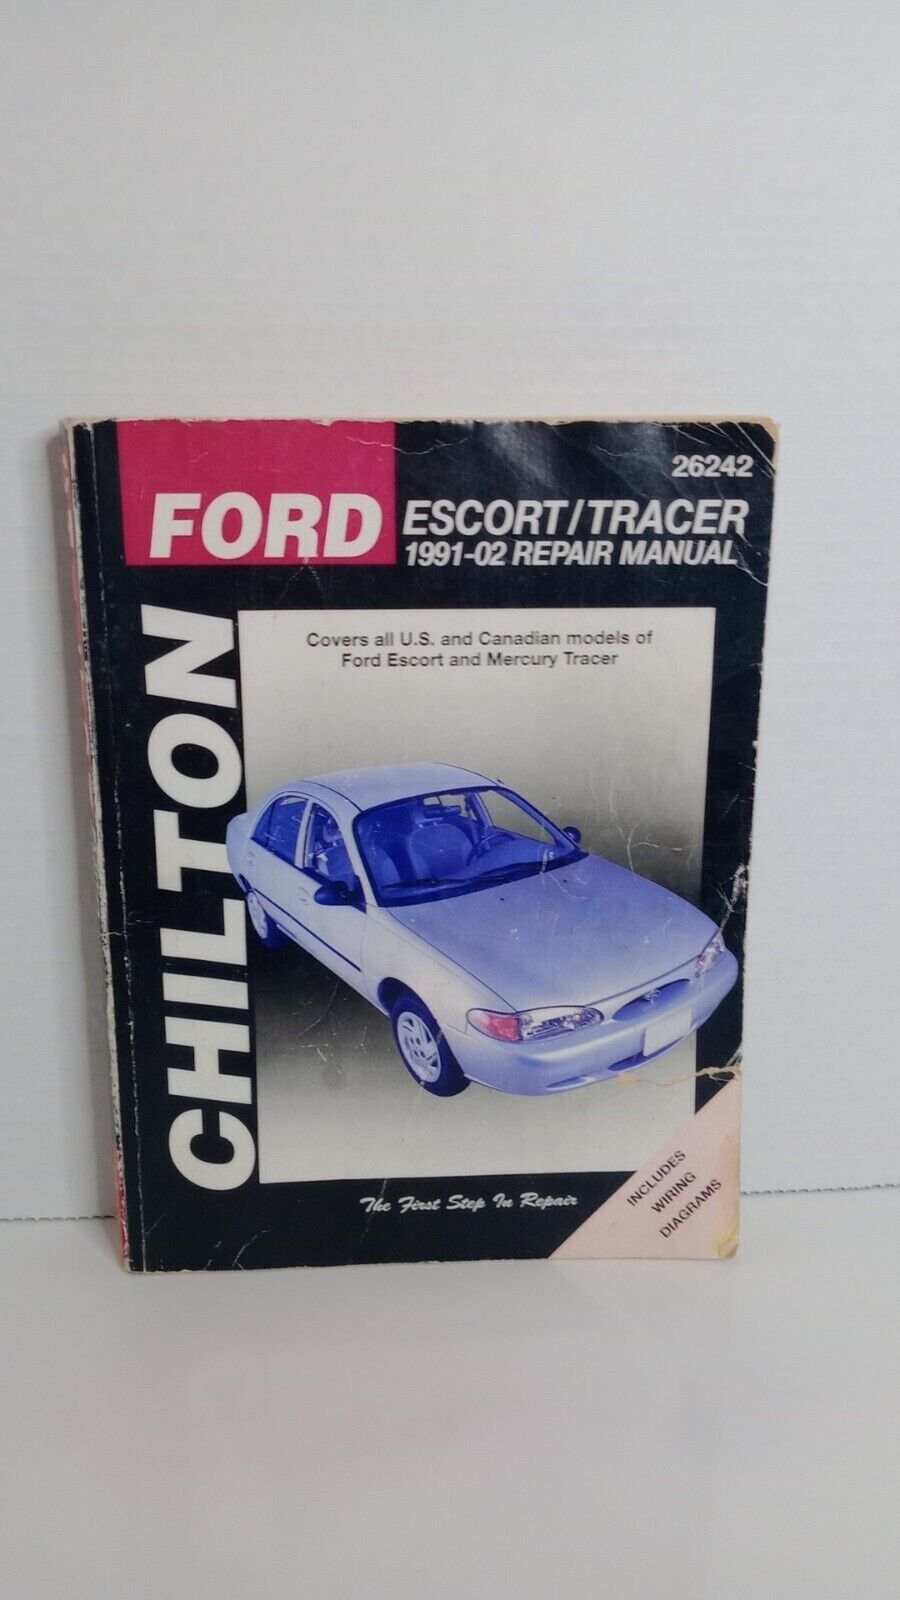 Ford Escort/Tracer Chilton Repair Manual for 1991-02